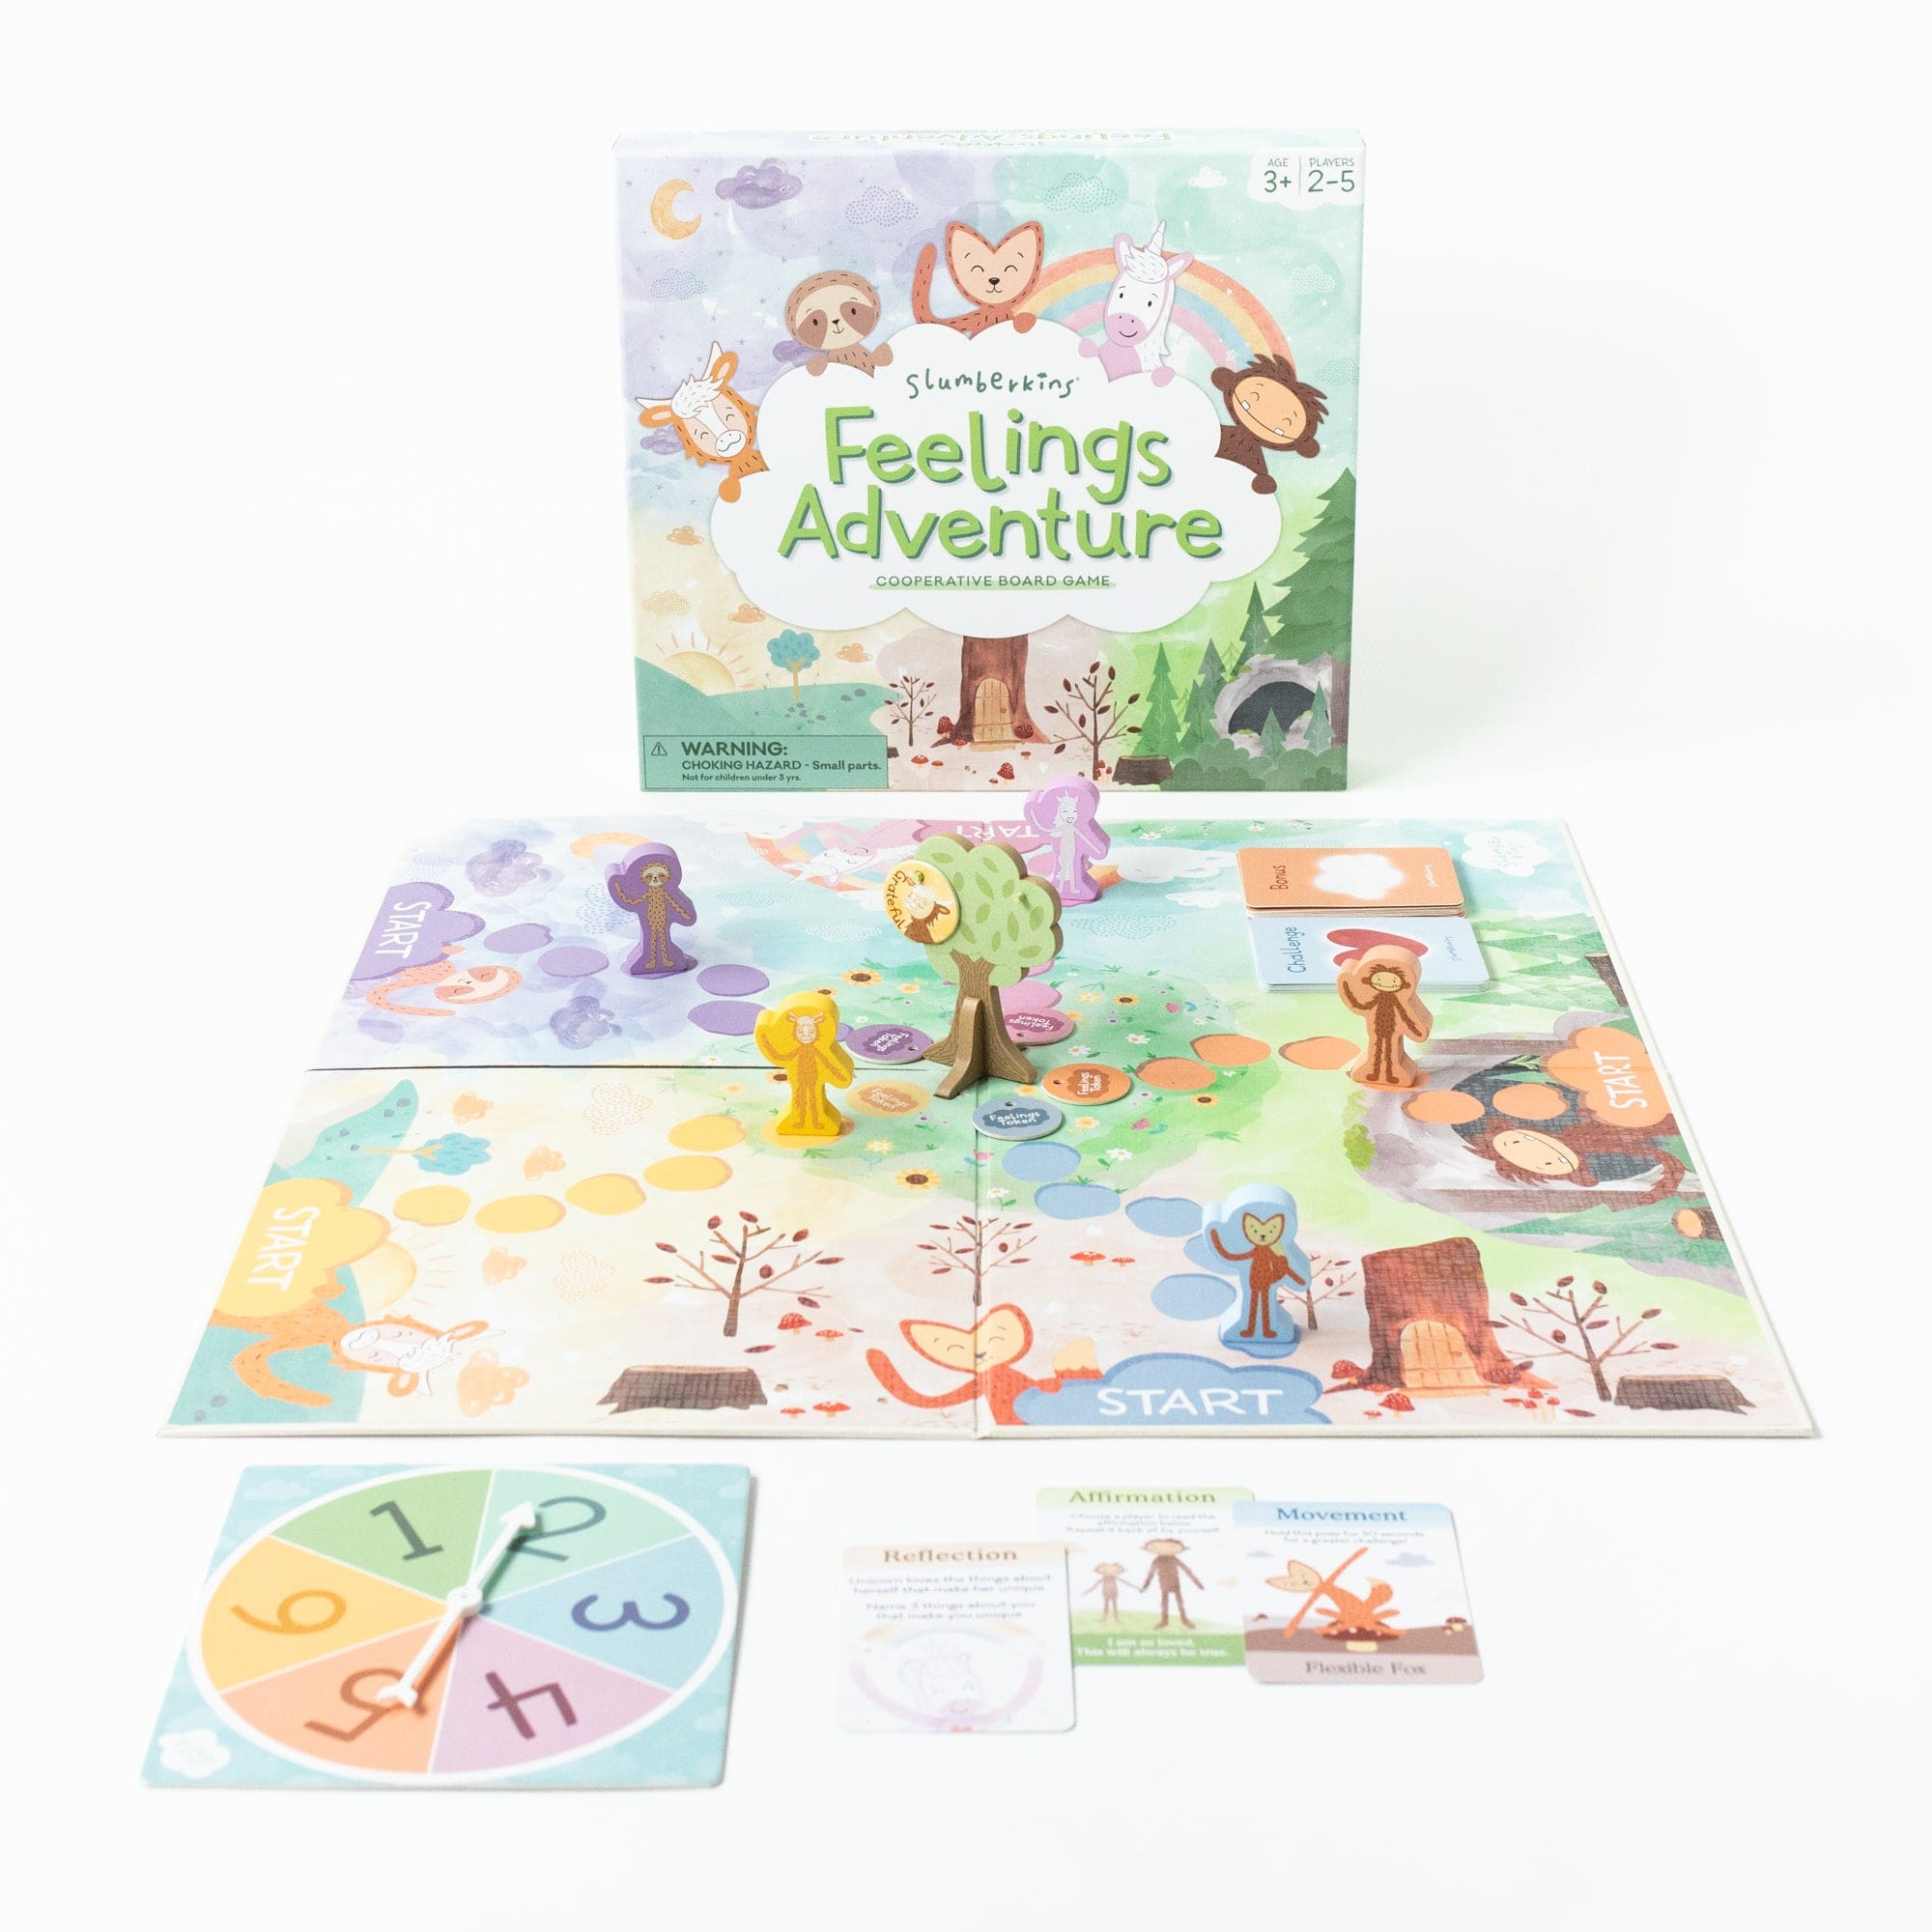 Feelings Adventure Board Game for Kids - View Product